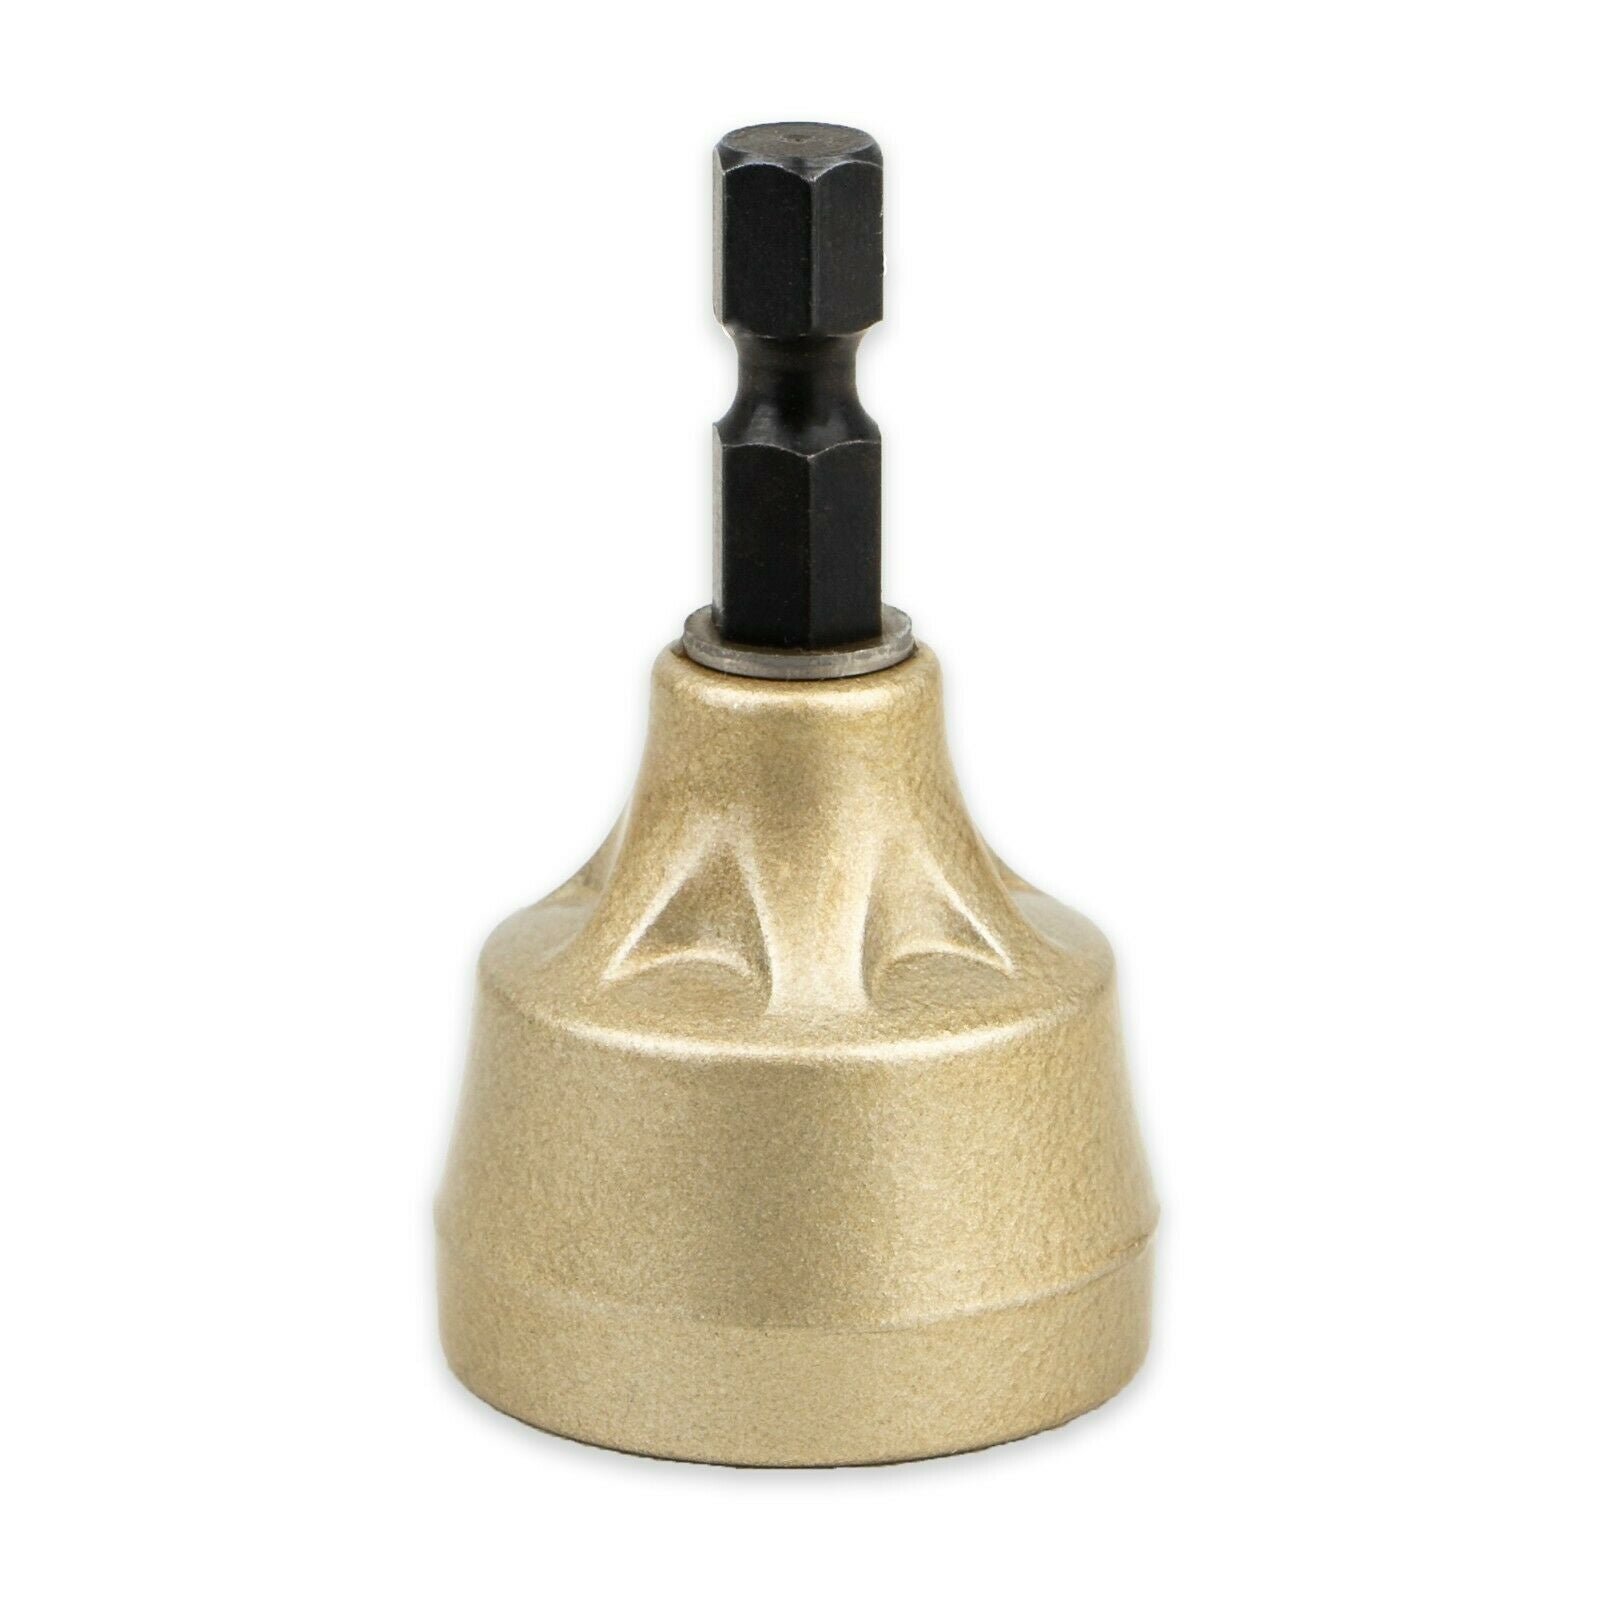 Deburring External Chamfer Drill Bit Tool Tungsten Blades, Removes Burrs on 1/8"-3/4"(3mm-19mm) Bolts - Tool Guy Republic